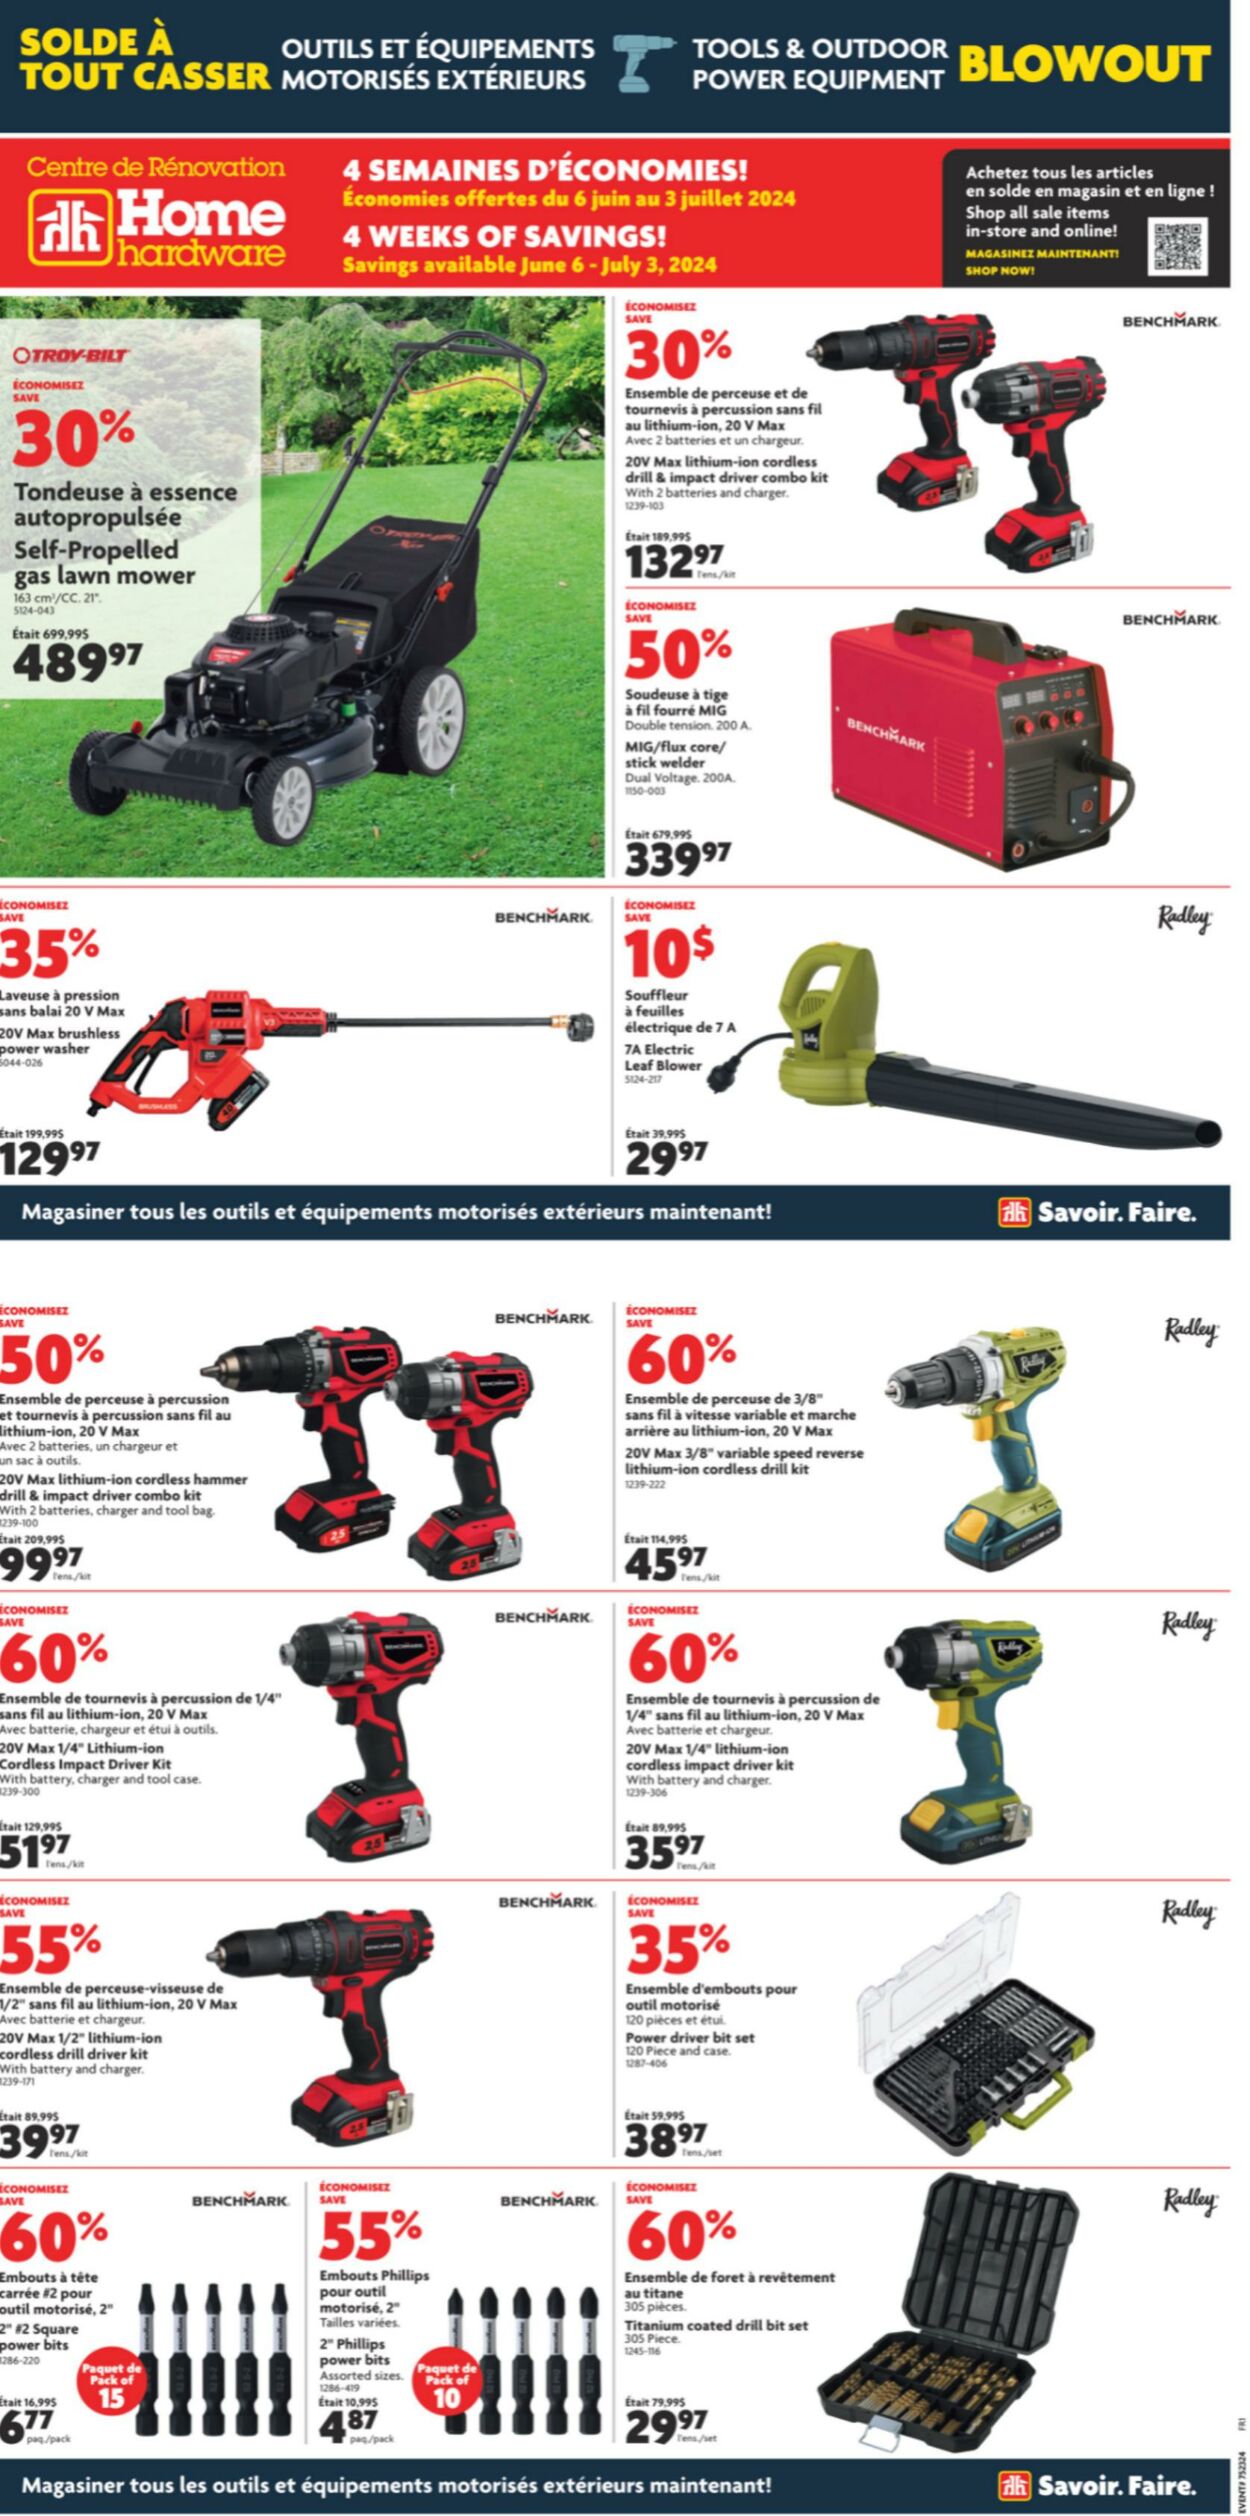 Home Hardware Promotional flyers